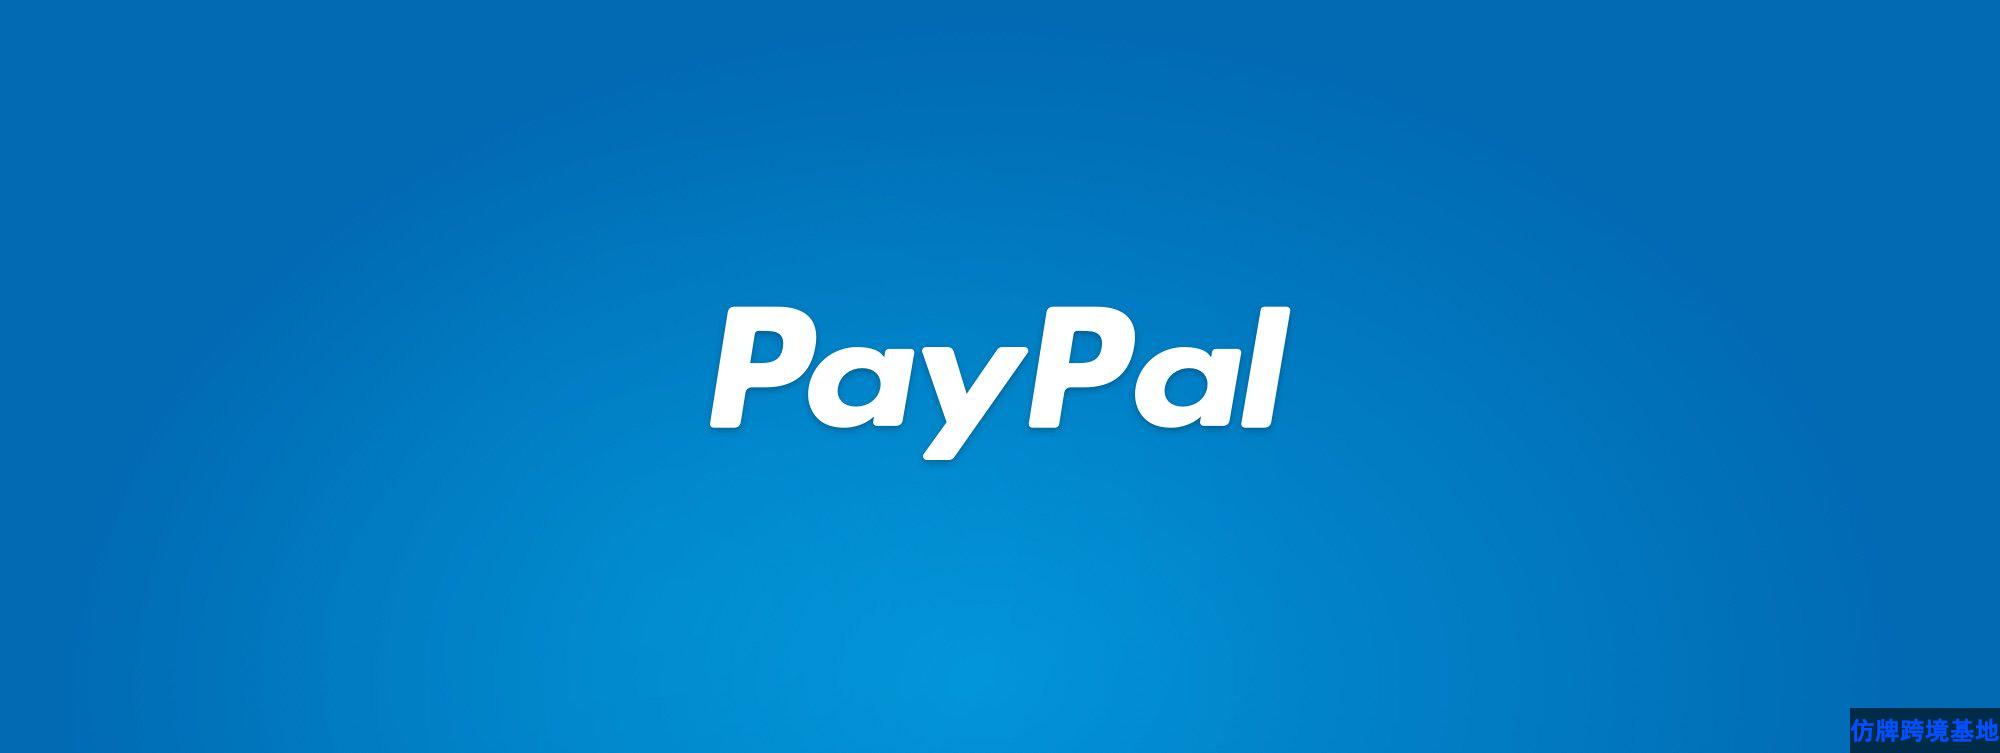 You can now pay with PayPal and a range of other payment methods in the  Popsa app